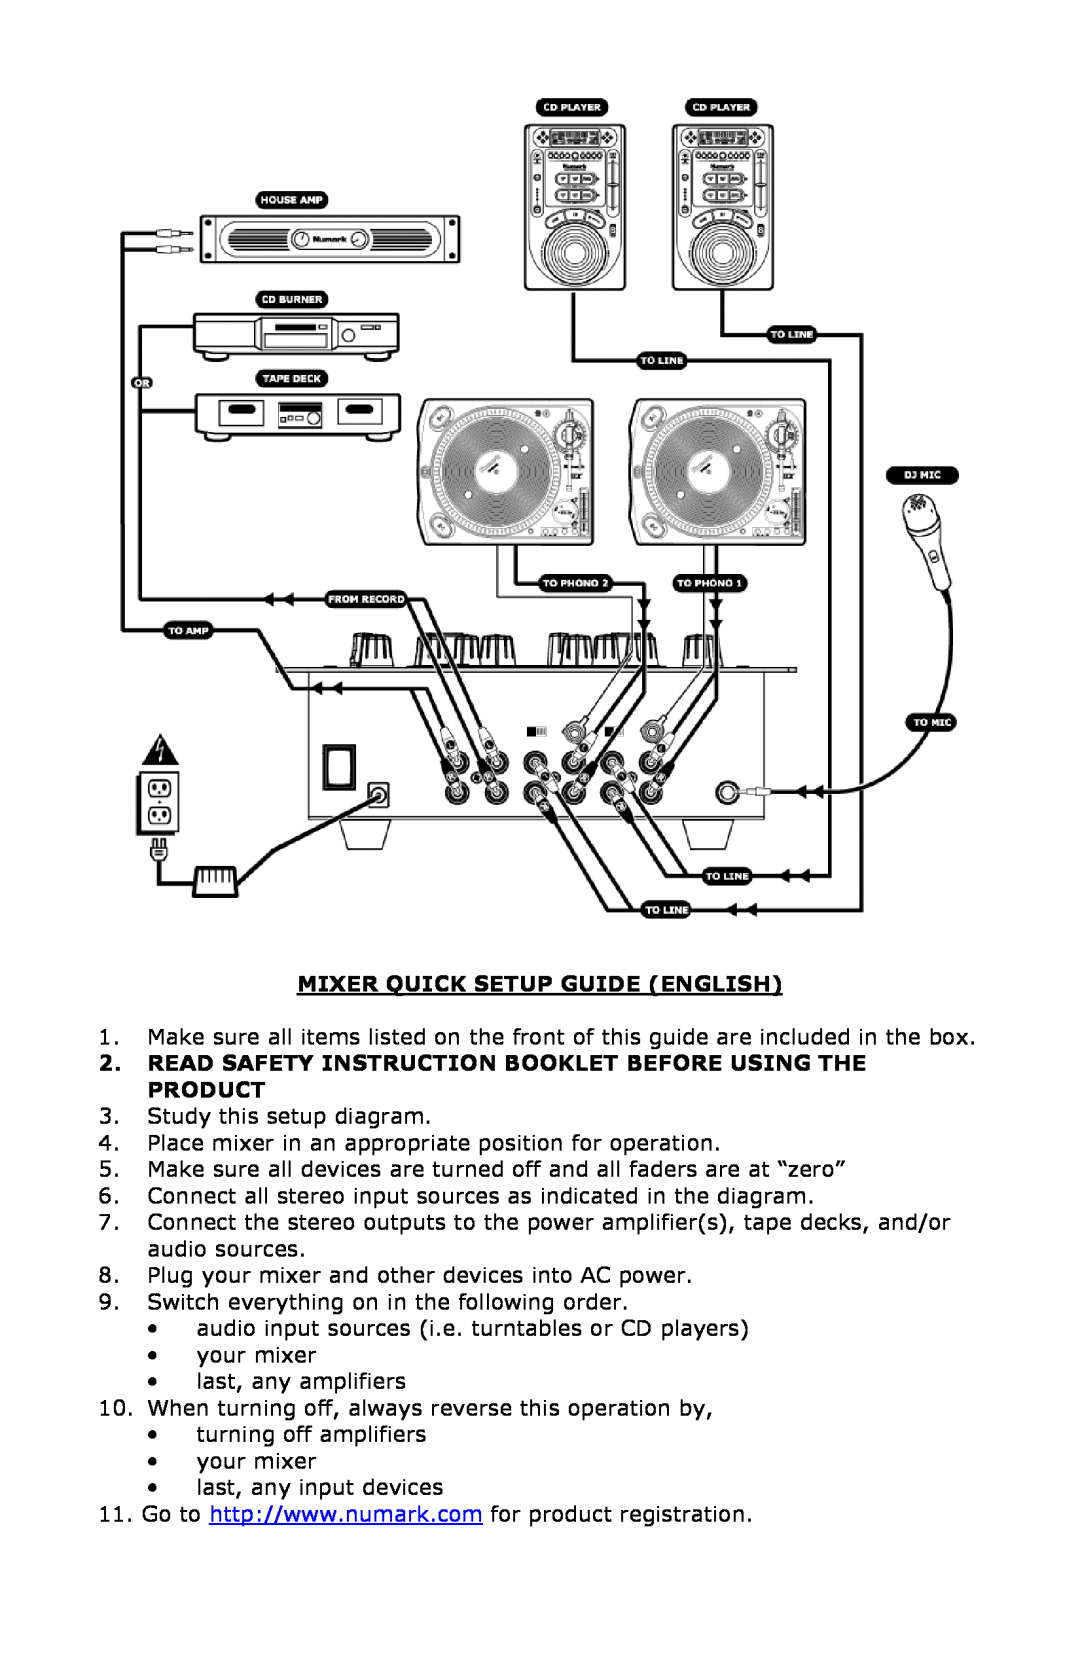 Numark Industries DXM01 Mixer Quick Setup Guide English, Read Safety Instruction Booklet Before Using The Product 